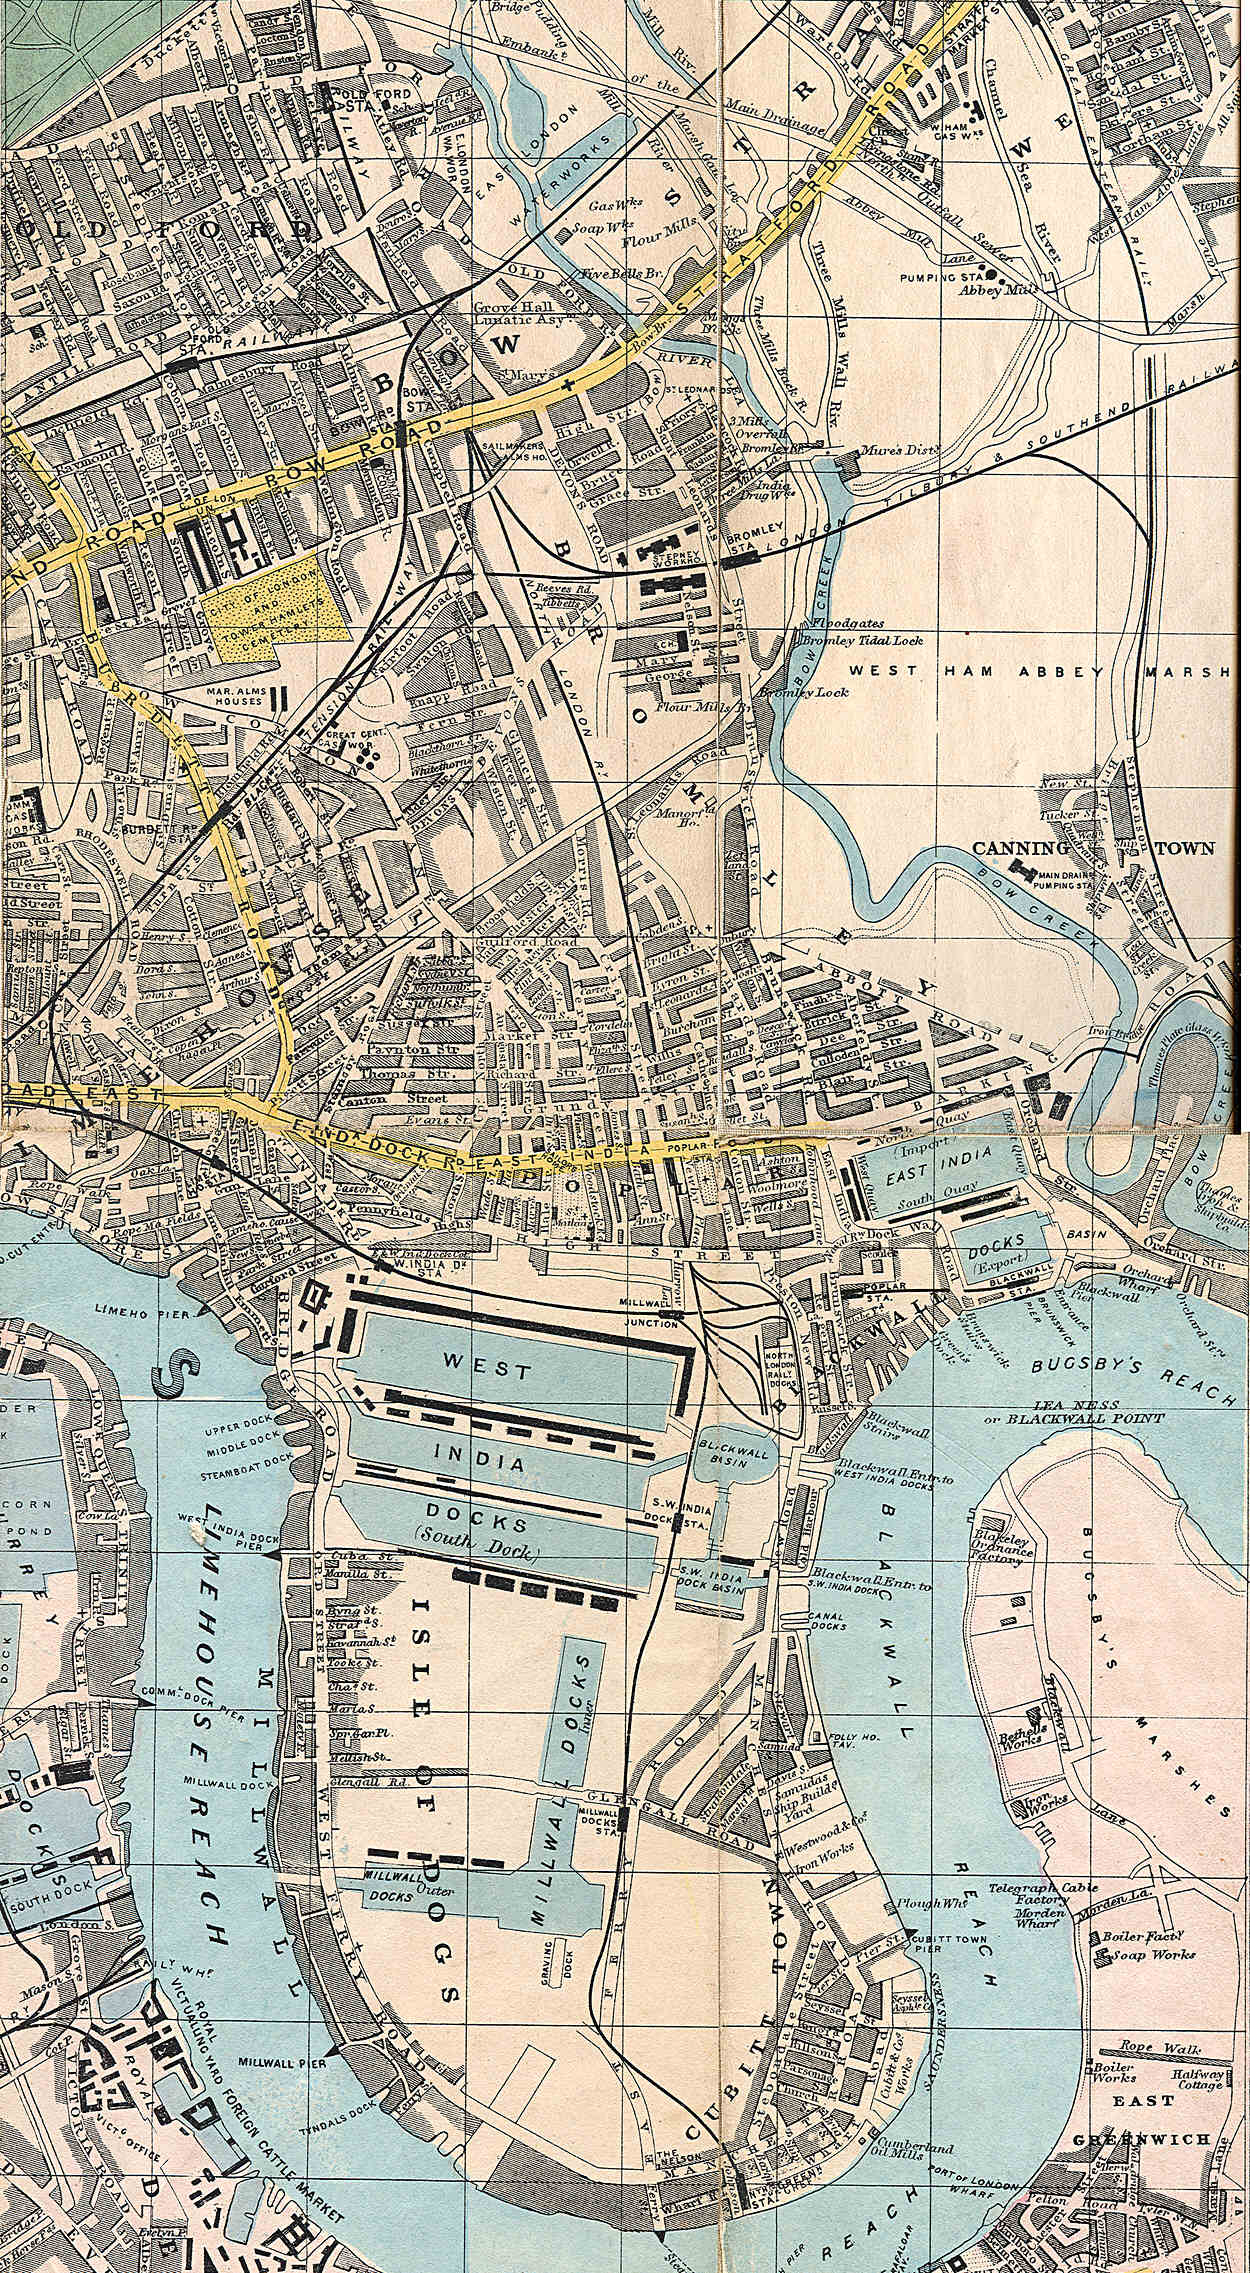 1882 - "Reynolds New Map of London and Suburbs"